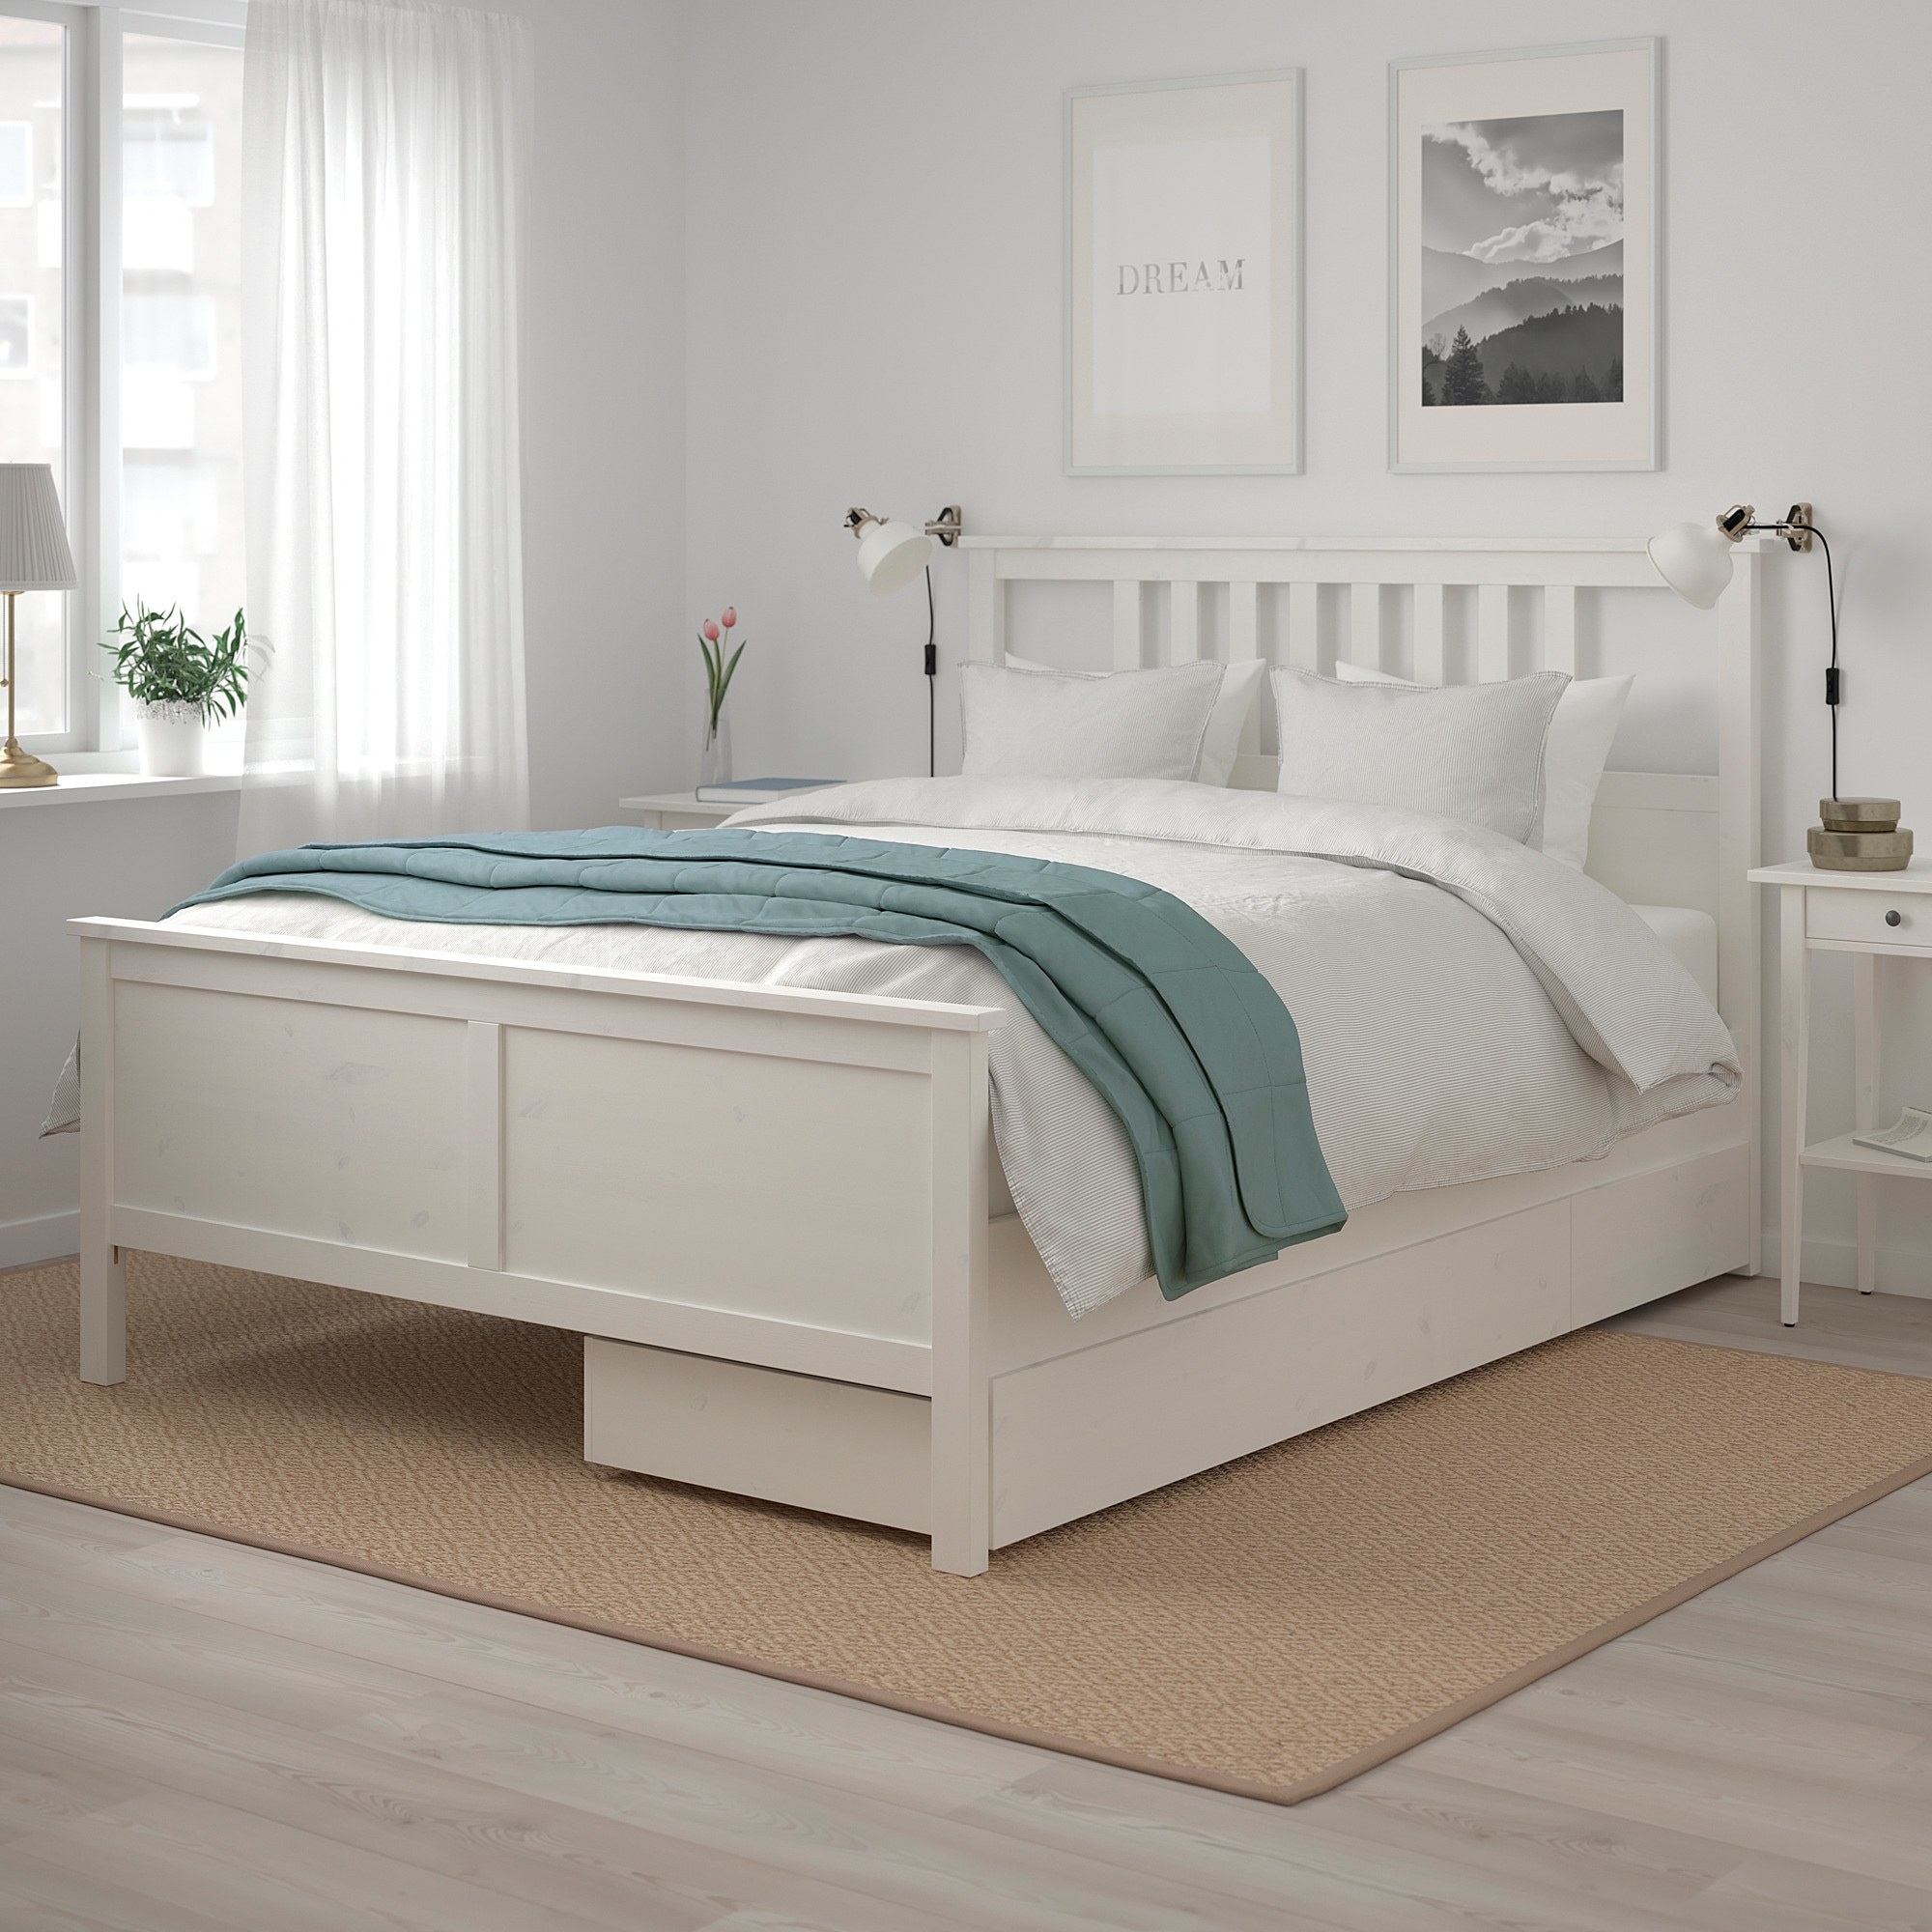 29 Bed Frames That Only Look, Minimalist Twin Bed Frame With Storage